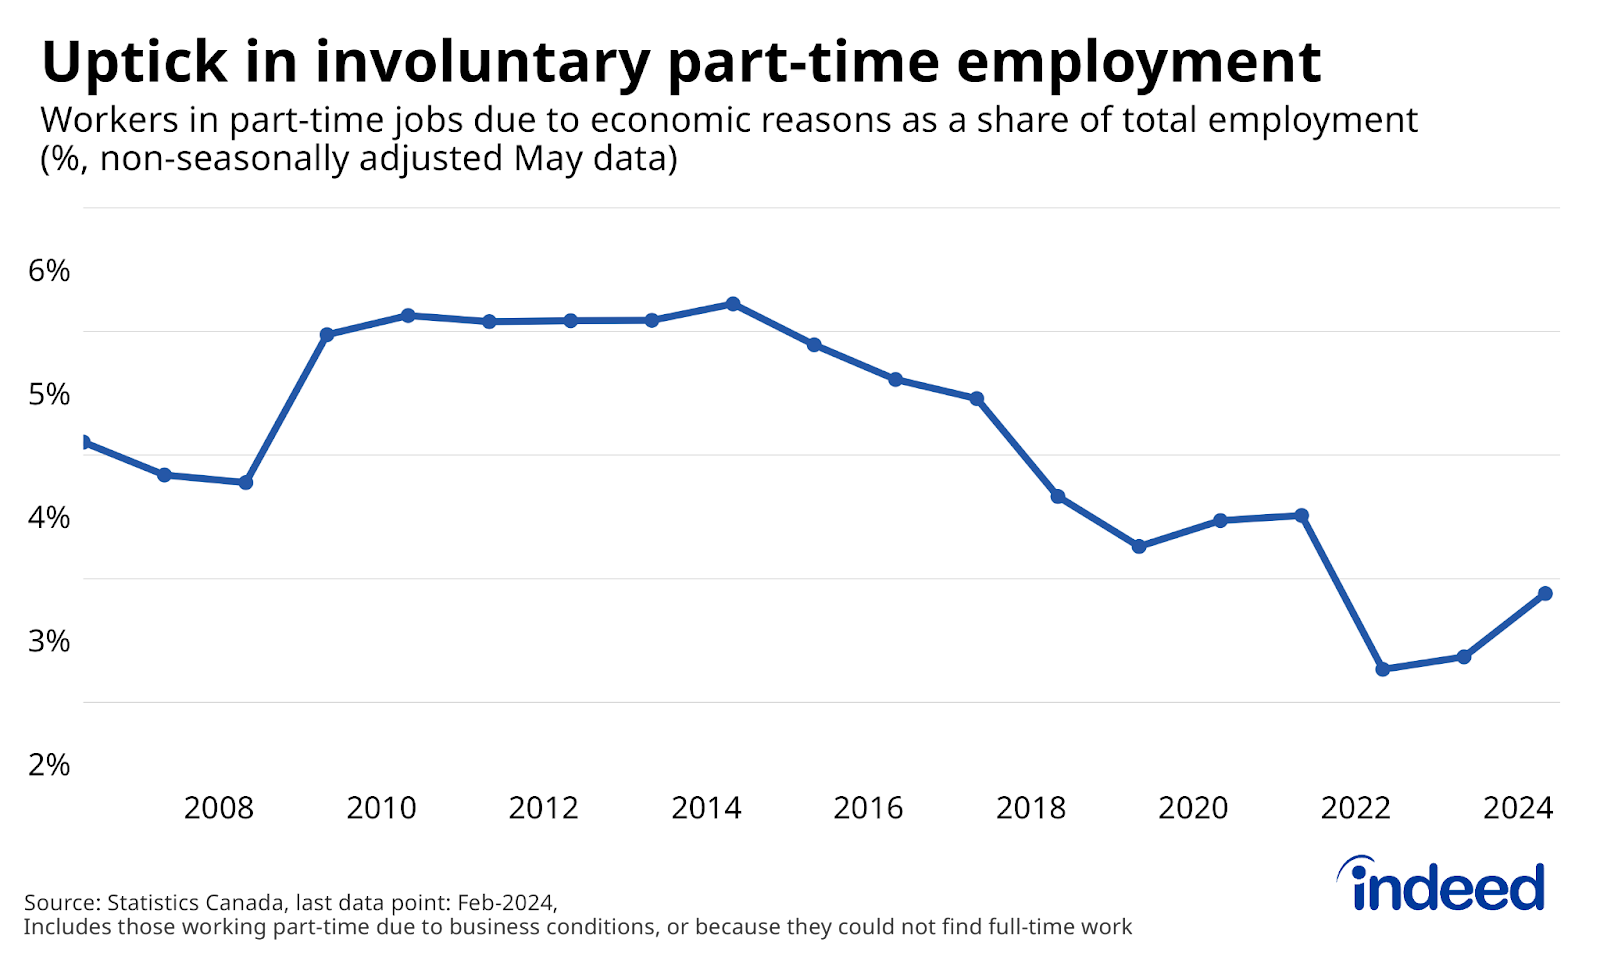 Line chart titled “Uptick in involuntary part-time employment” shows the share of Canadian workers employed part-time due to economic reasons in May between 2006 and 2024. Over the past year, the share has ticked up from 2.9% to 3.4% of all workers.